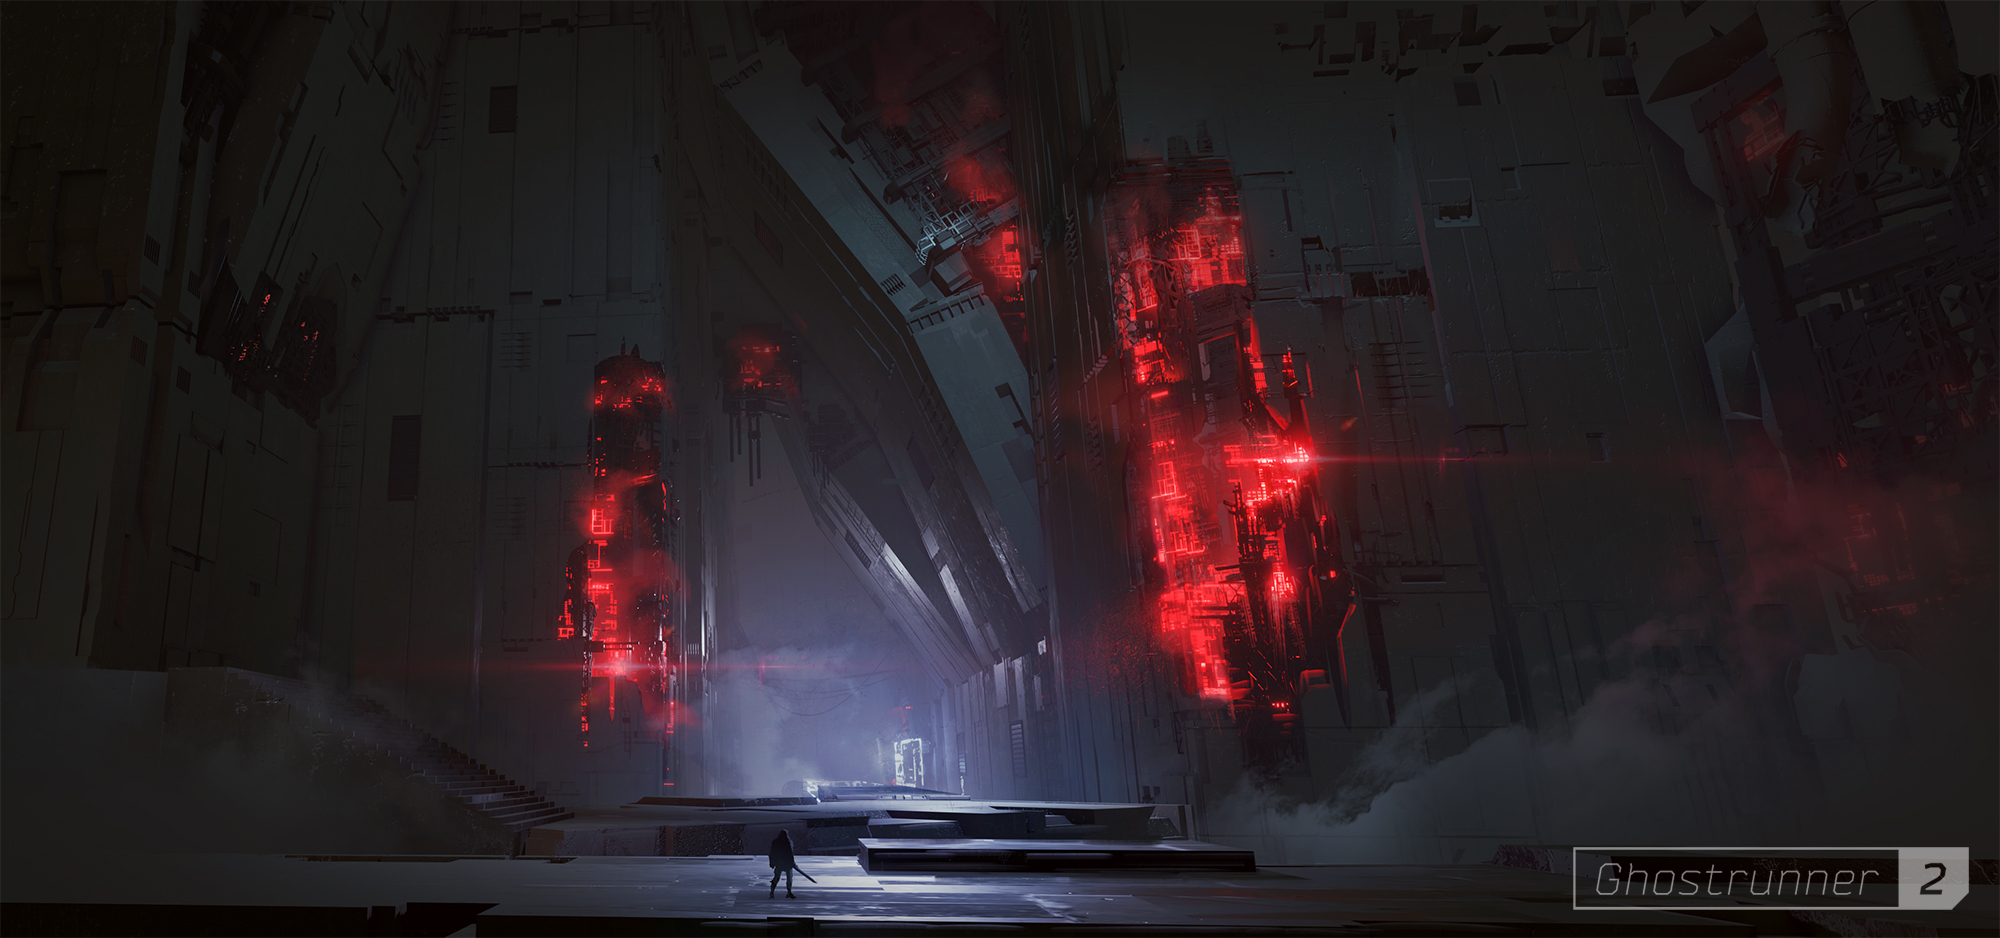 Ghostrunner 2 concept art of a cyber cathedral